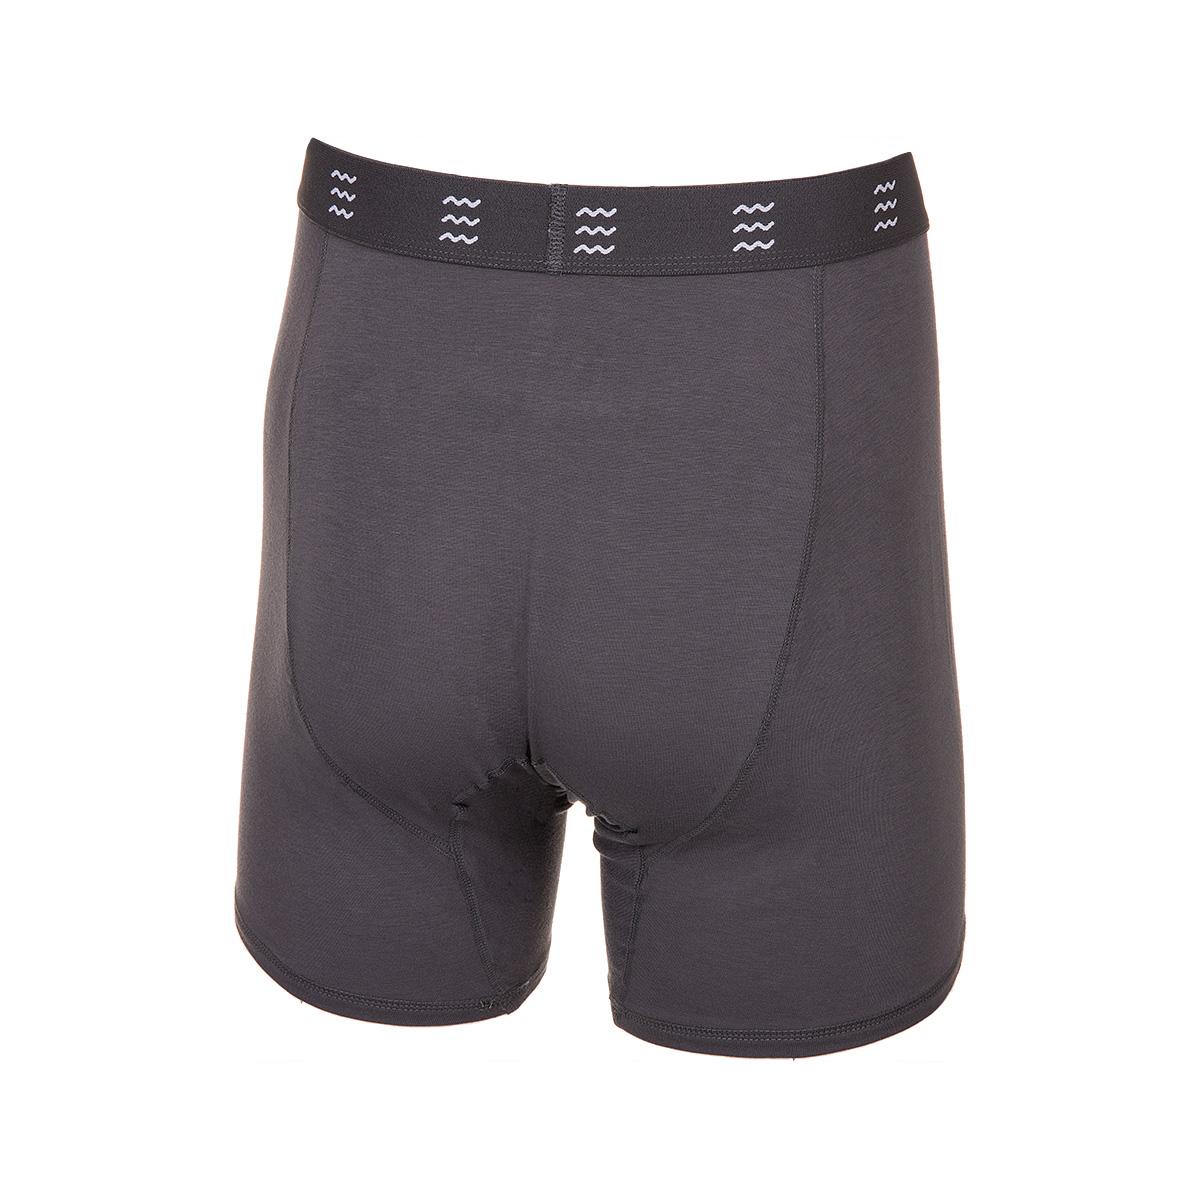 FREE FLY | Men's Bamboo Comfort Boxer Brief